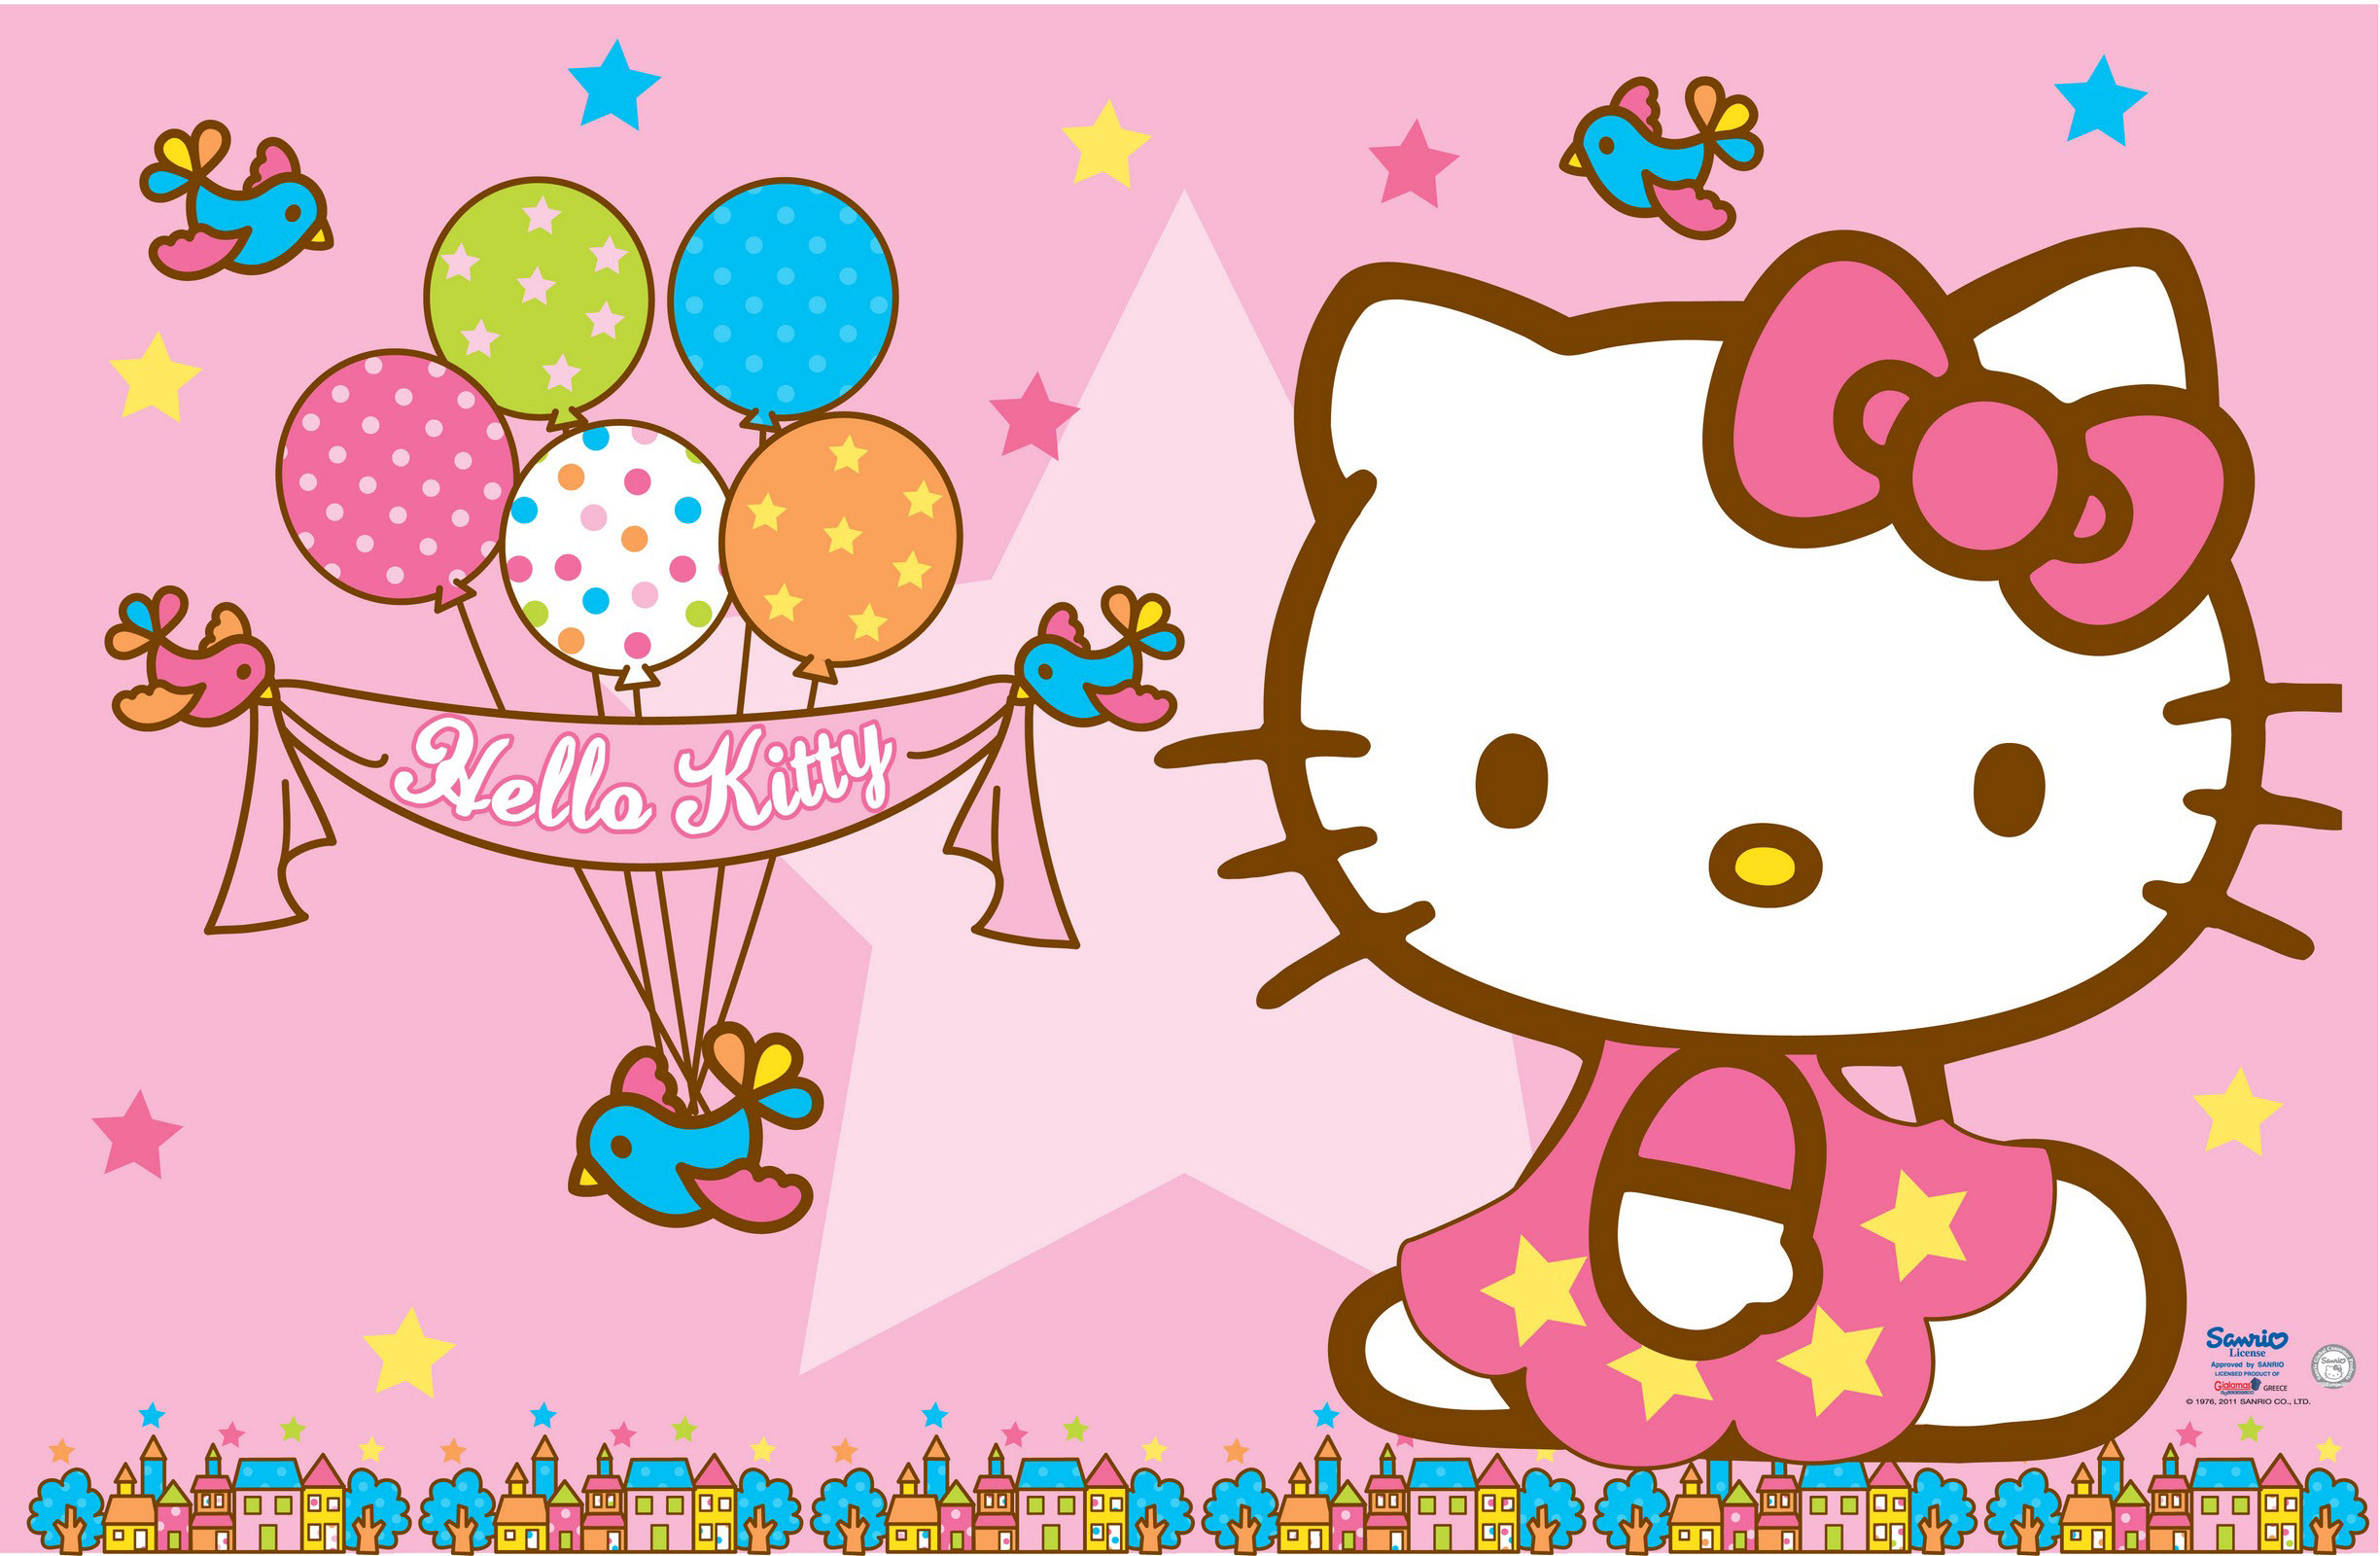 Pin by Taylor on Walls  Hello kitty wallpaper, Hello kitty images, Kitty  wallpaper